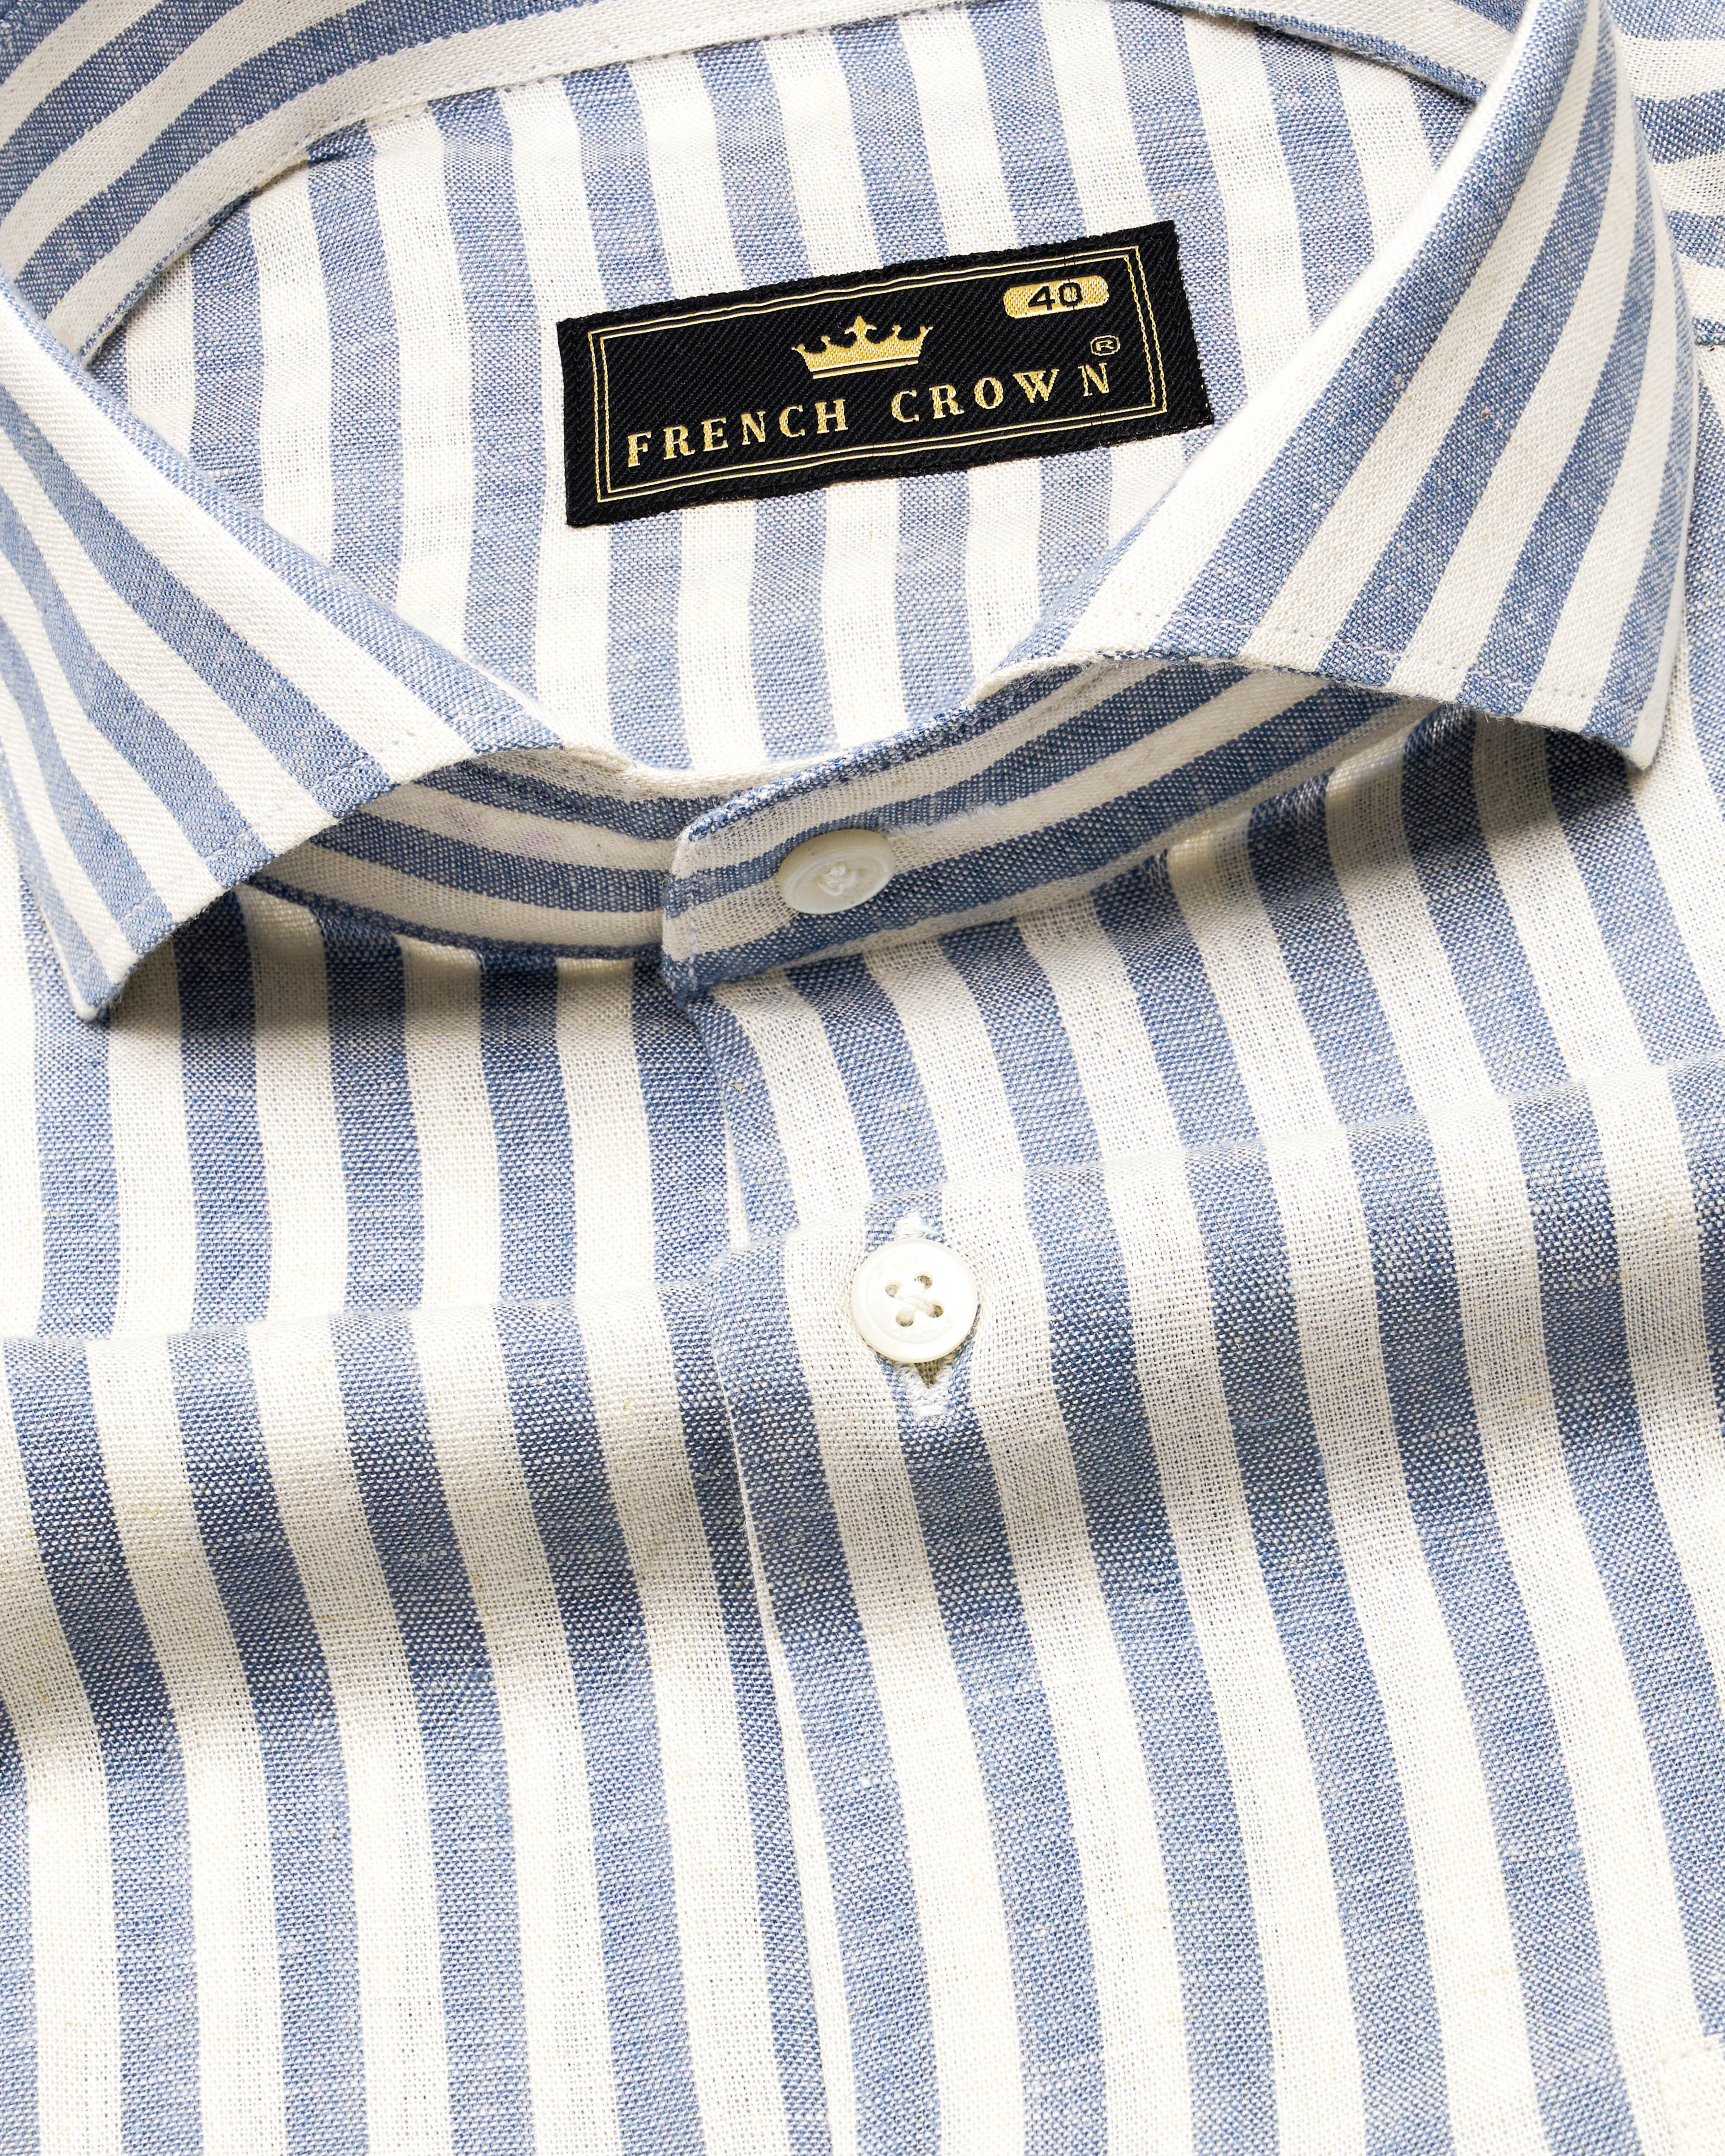 Heather Blue and Off White Striped Luxurious Linen Shirt 9768-CA-38, 9768-CA-H-38, 9768-CA-39, 9768-CA-H-39, 9768-CA-40, 9768-CA-H-40, 9768-CA-42, 9768-CA-H-42, 9768-CA-44, 9768-CA-H-44, 9768-CA-46, 9768-CA-H-46, 9768-CA-48, 9768-CA-H-48, 9768-CA-50, 9768-CA-H-50, 9768-CA-52, 9768-CA-H-52